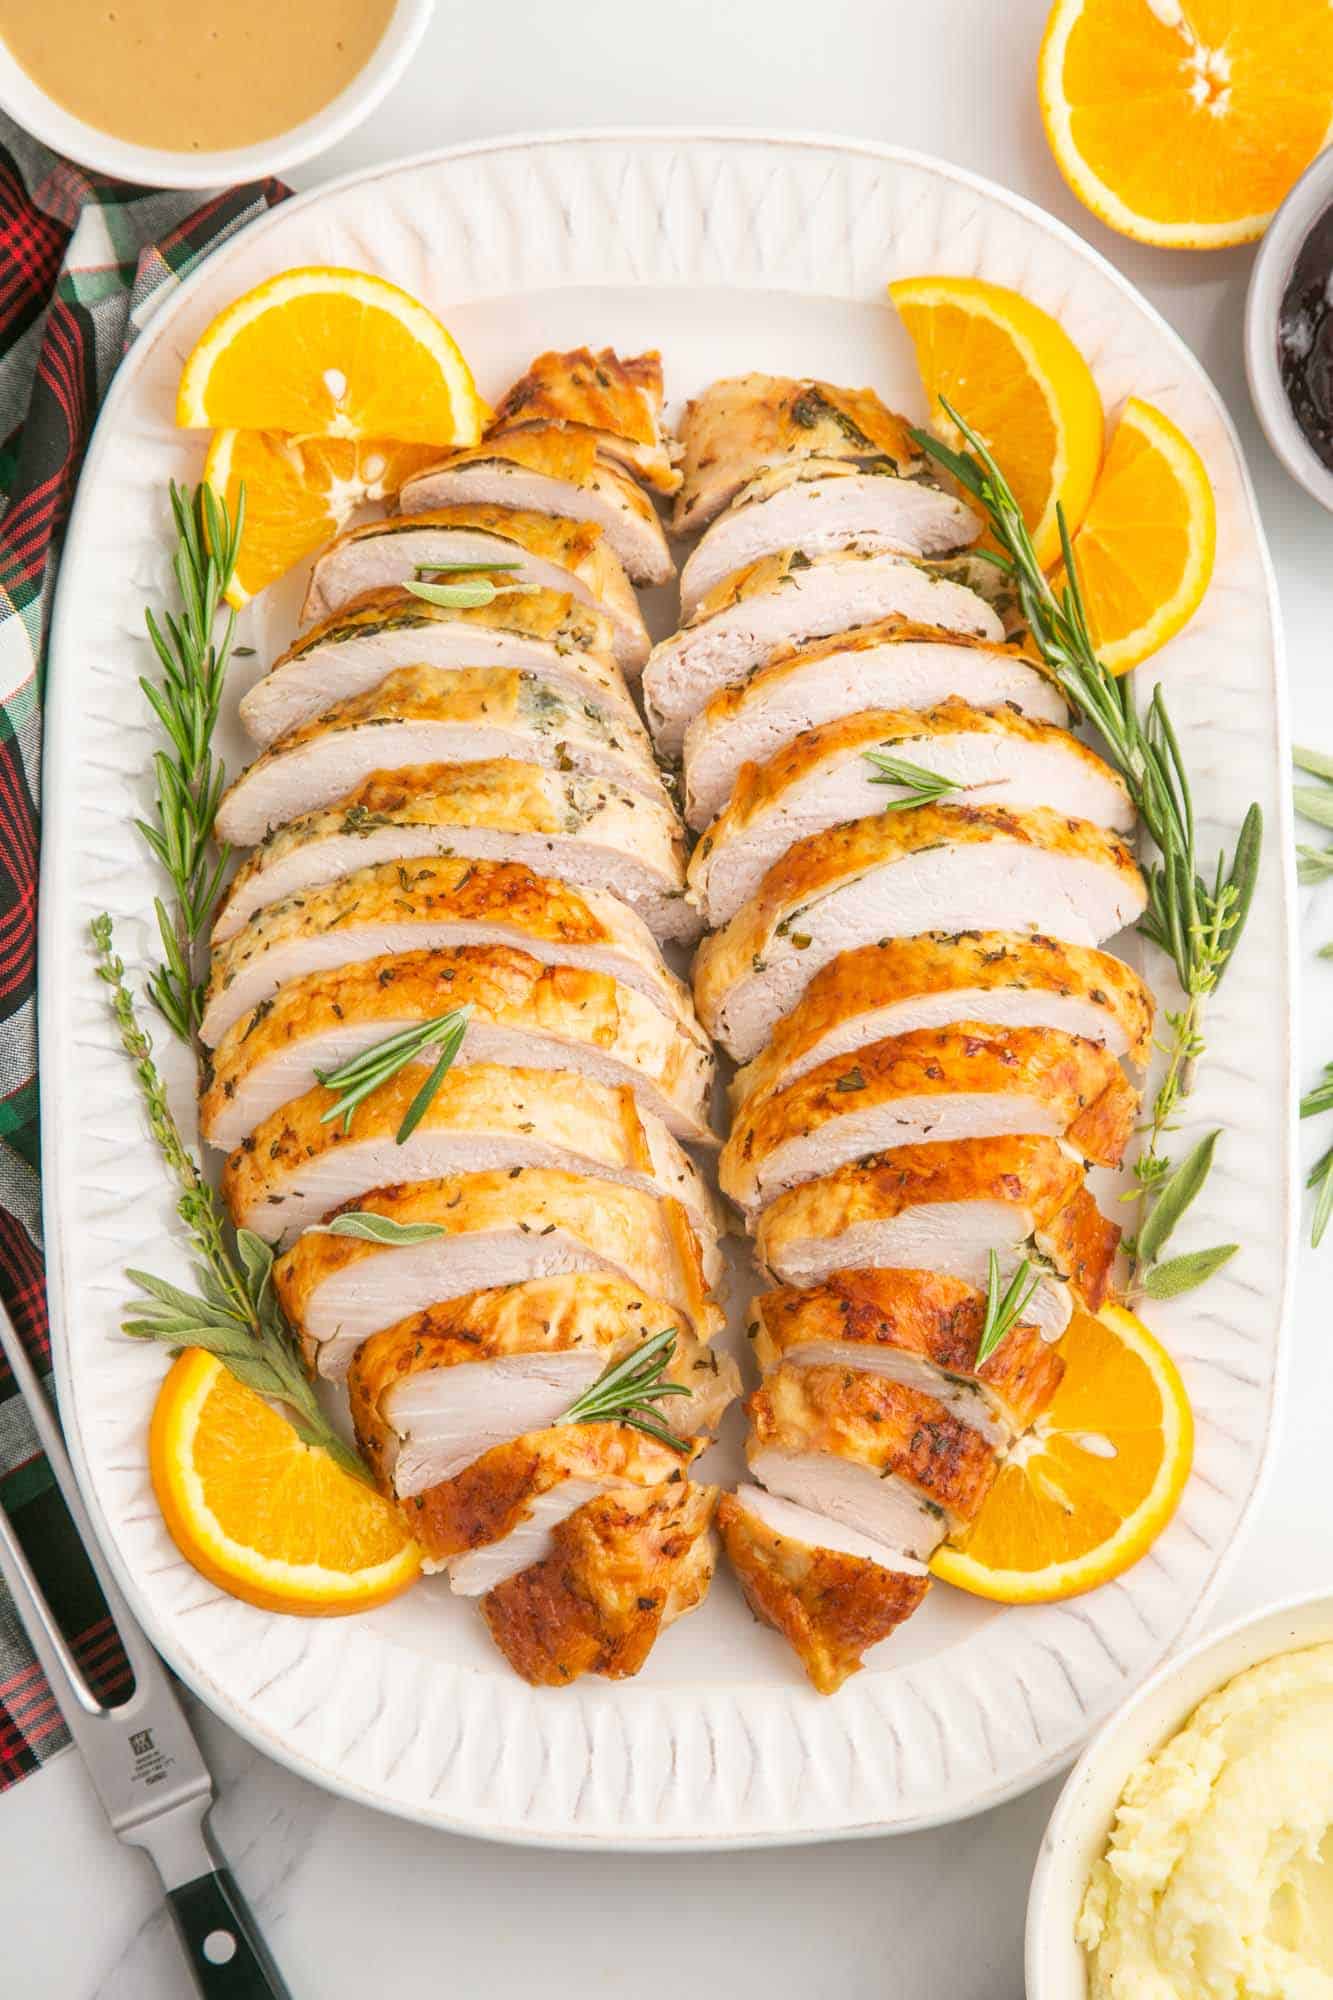 turkey breast meat sliced and arranged in two rows on a white platter surrounded by orange slices